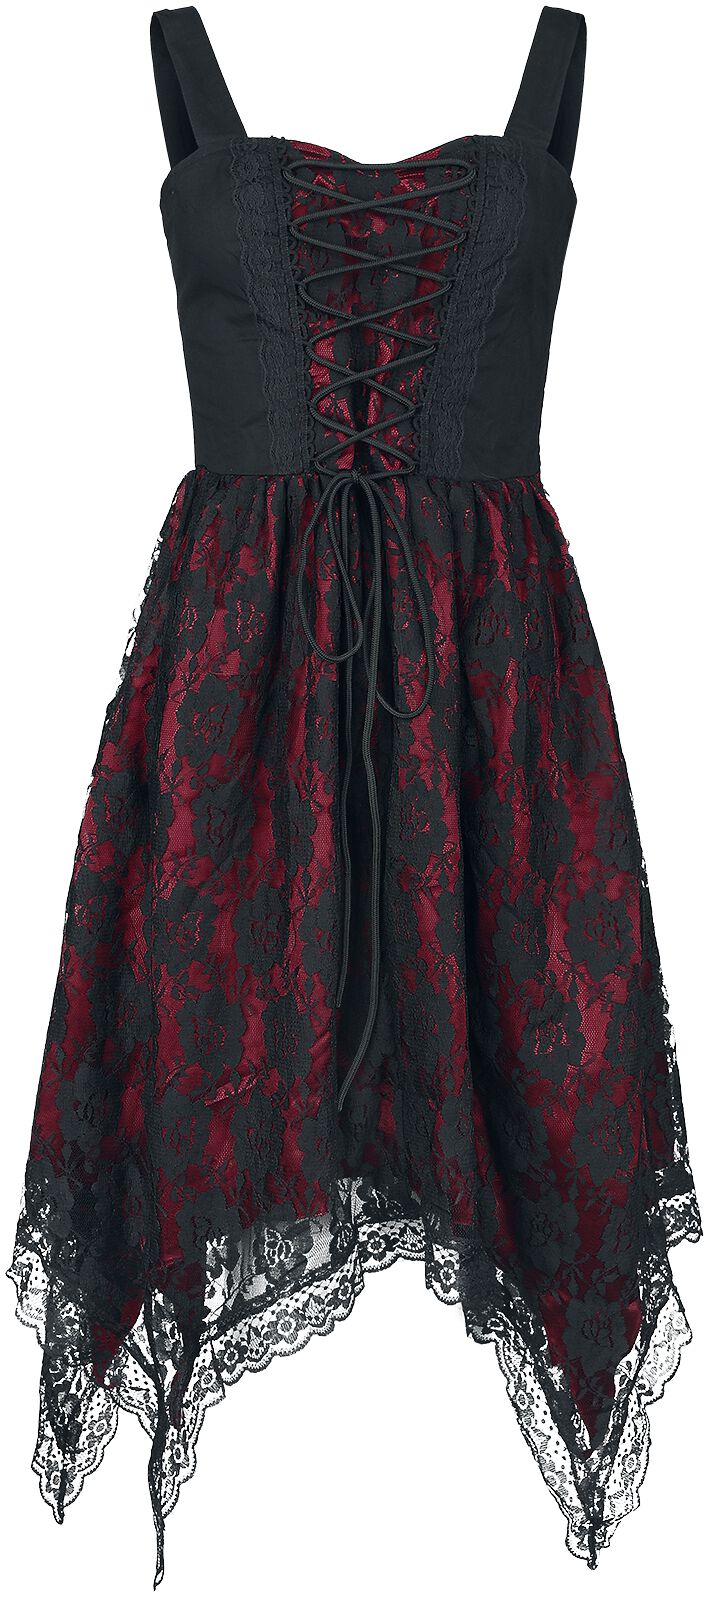 Image of Miniabito Gothic di Gothicana by EMP - Dress with lace and zip seam - S a XXL - Donna - nero/rosso